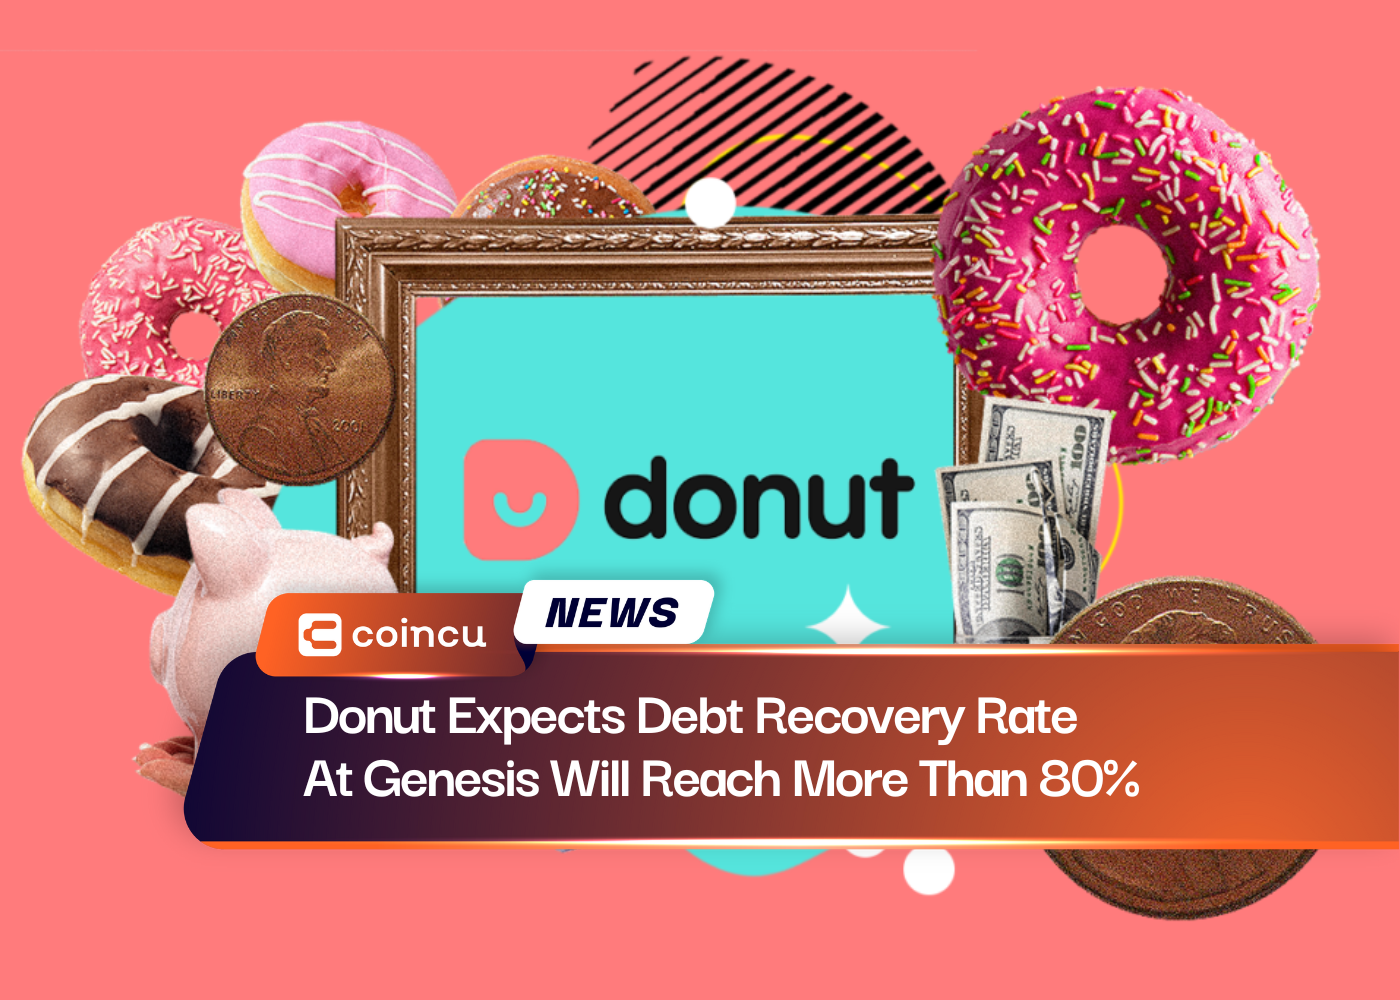 Donut Expects Debt Recovery Rate At Genesis Will Reach More Than 80%